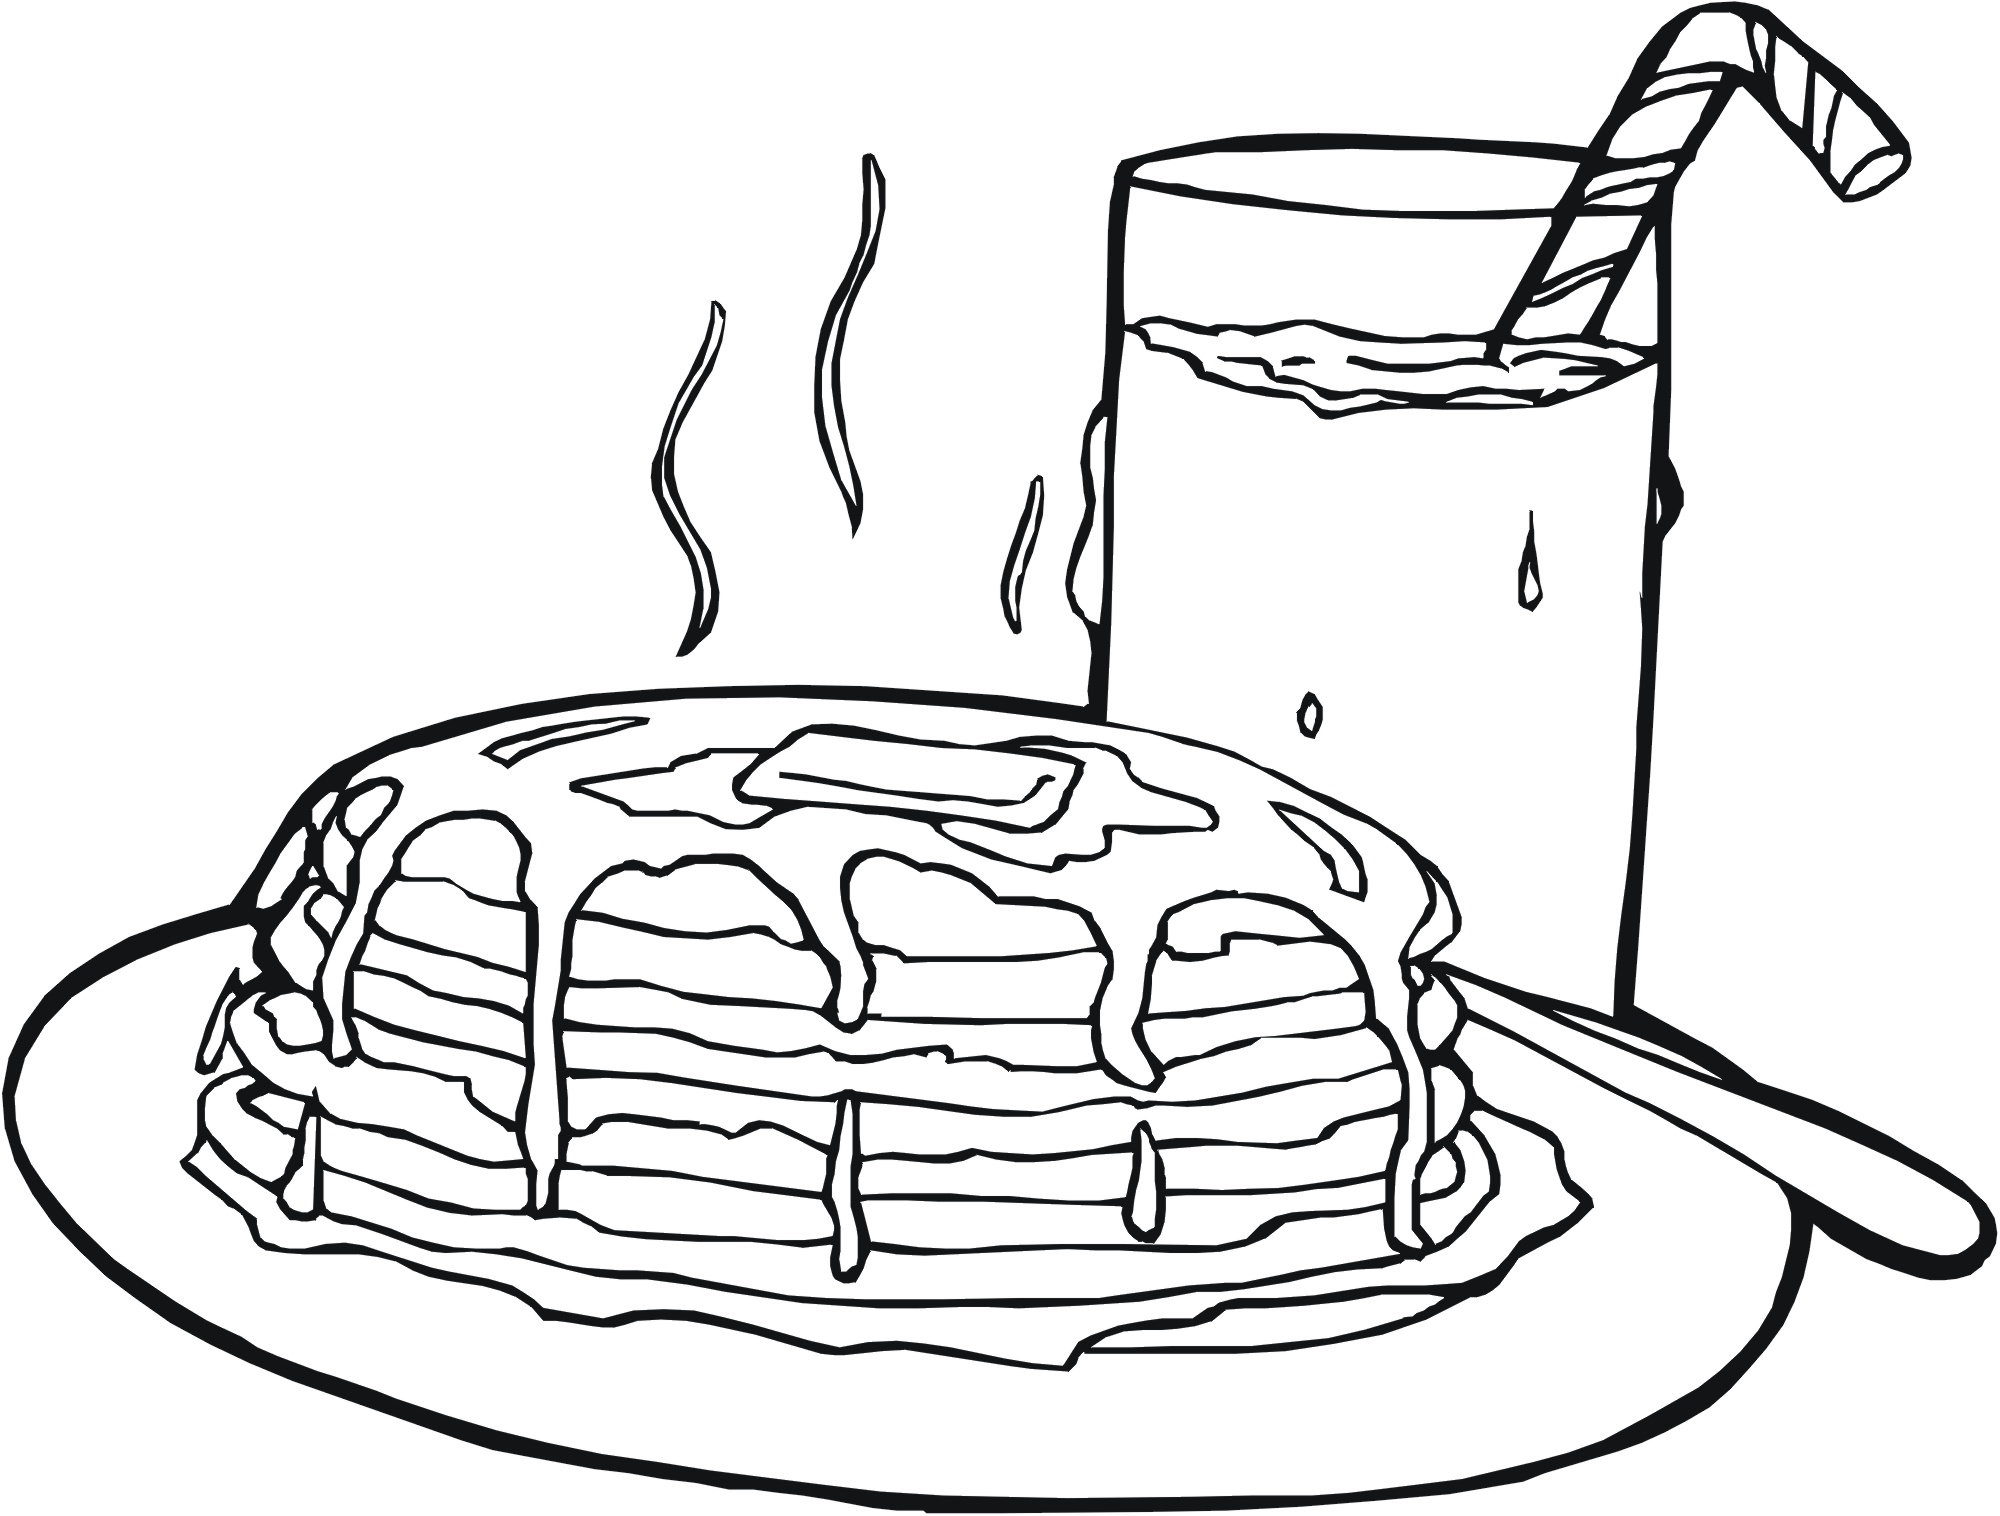 Realistic Food Coloring Pages at GetColorings.com | Free printable